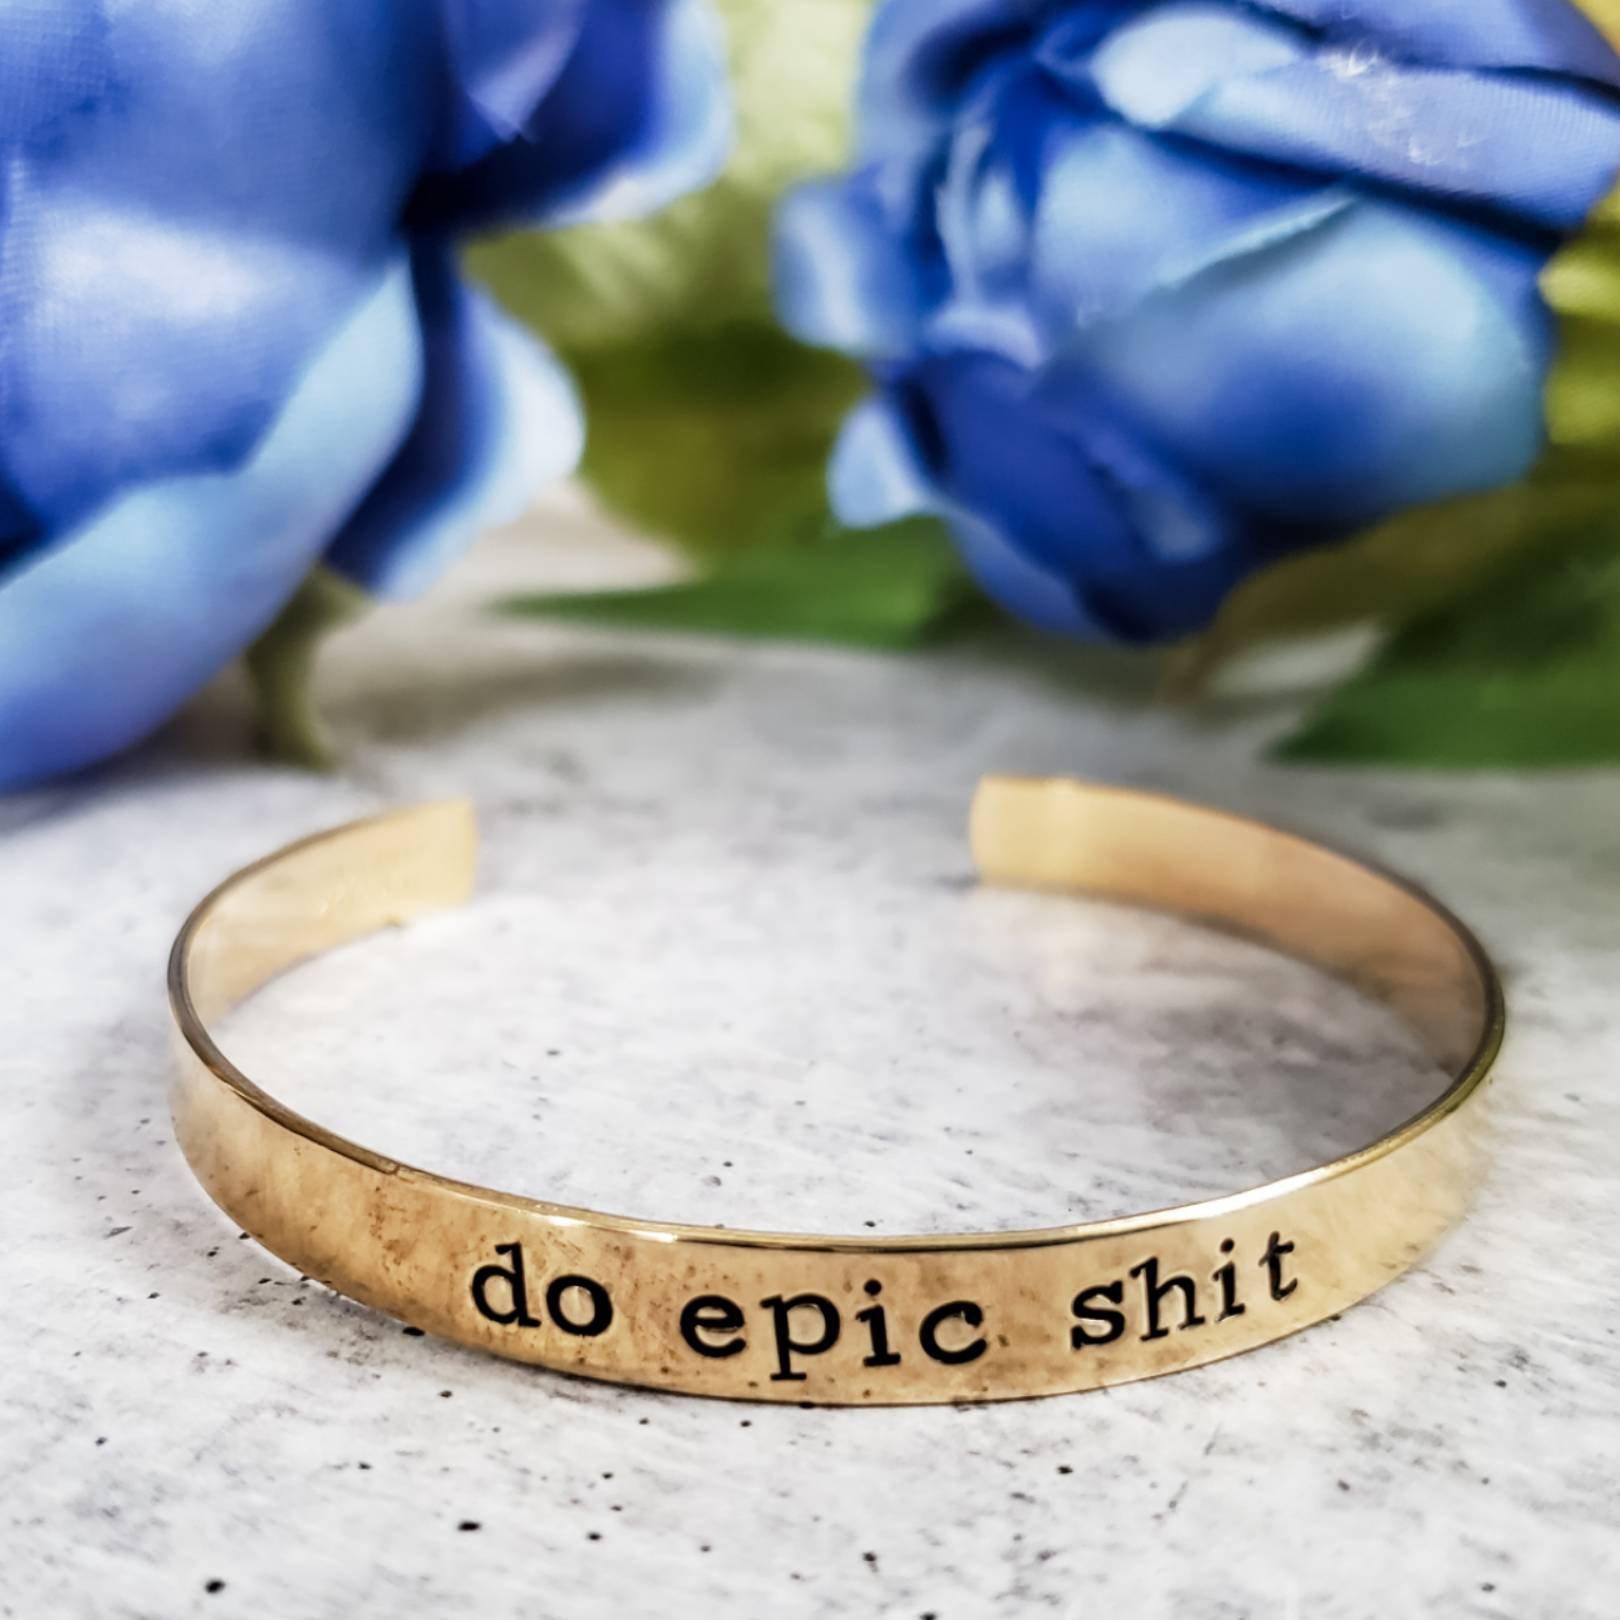 DO EPIC SHIT Stacking Cuff Bracelet Salt and Sparkle